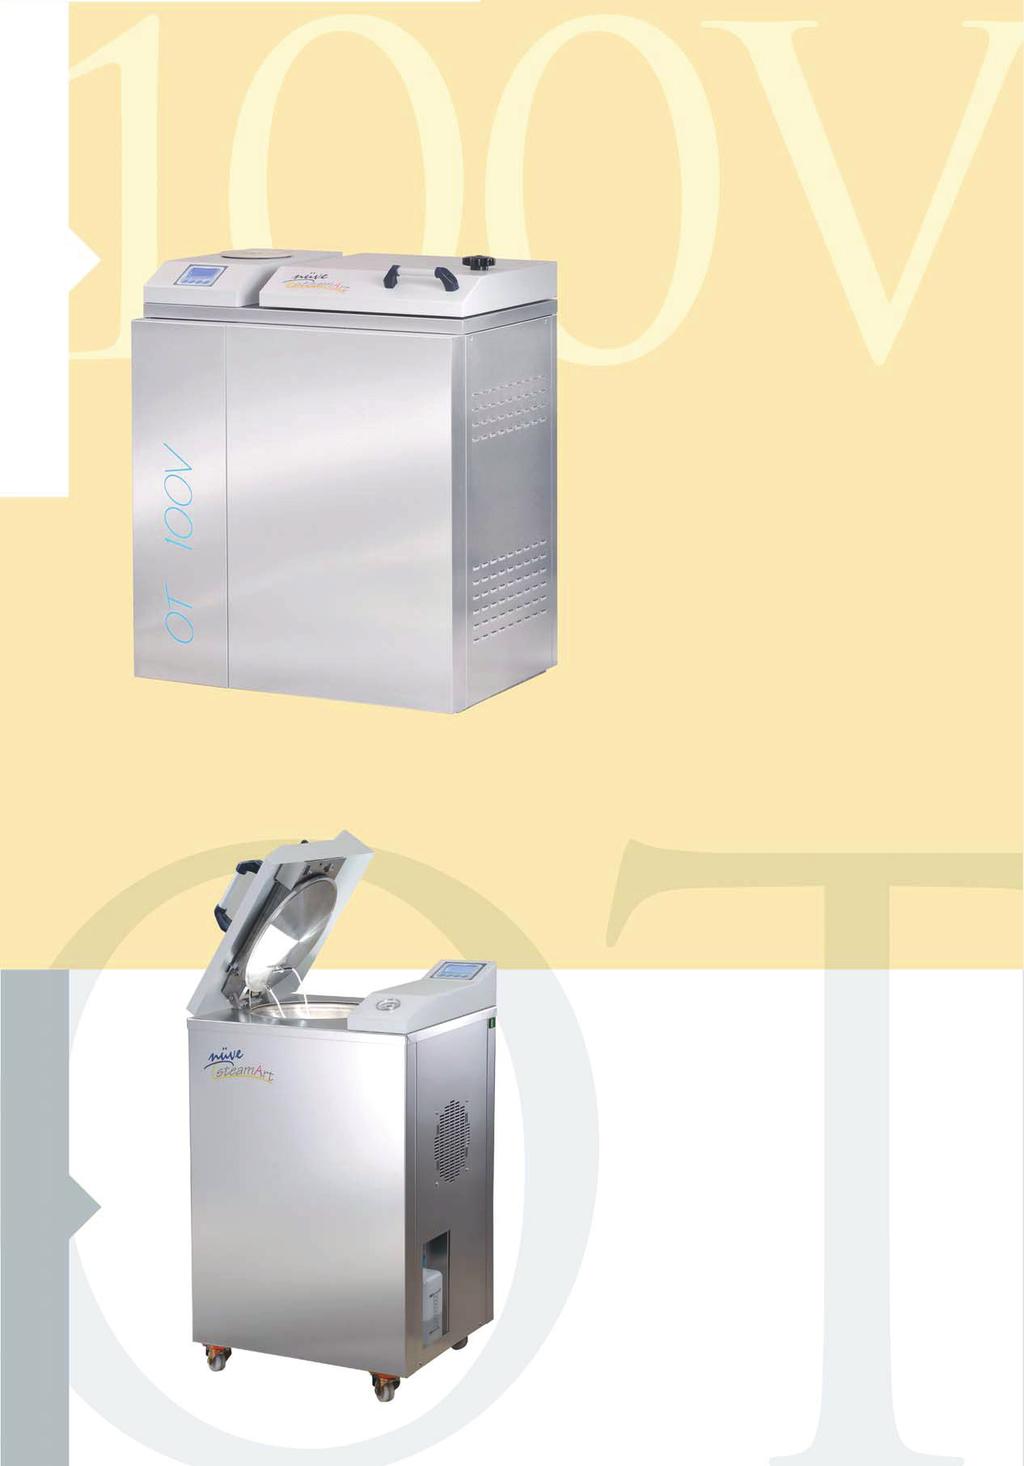 O T 1 0 0 V OT 100V VERTICAL STEAM STERILIZER Chamber volume : 100 liters Advanced technology for the sterilization of textile; wrapped or packed materials; glass and liquid Fully automatic system